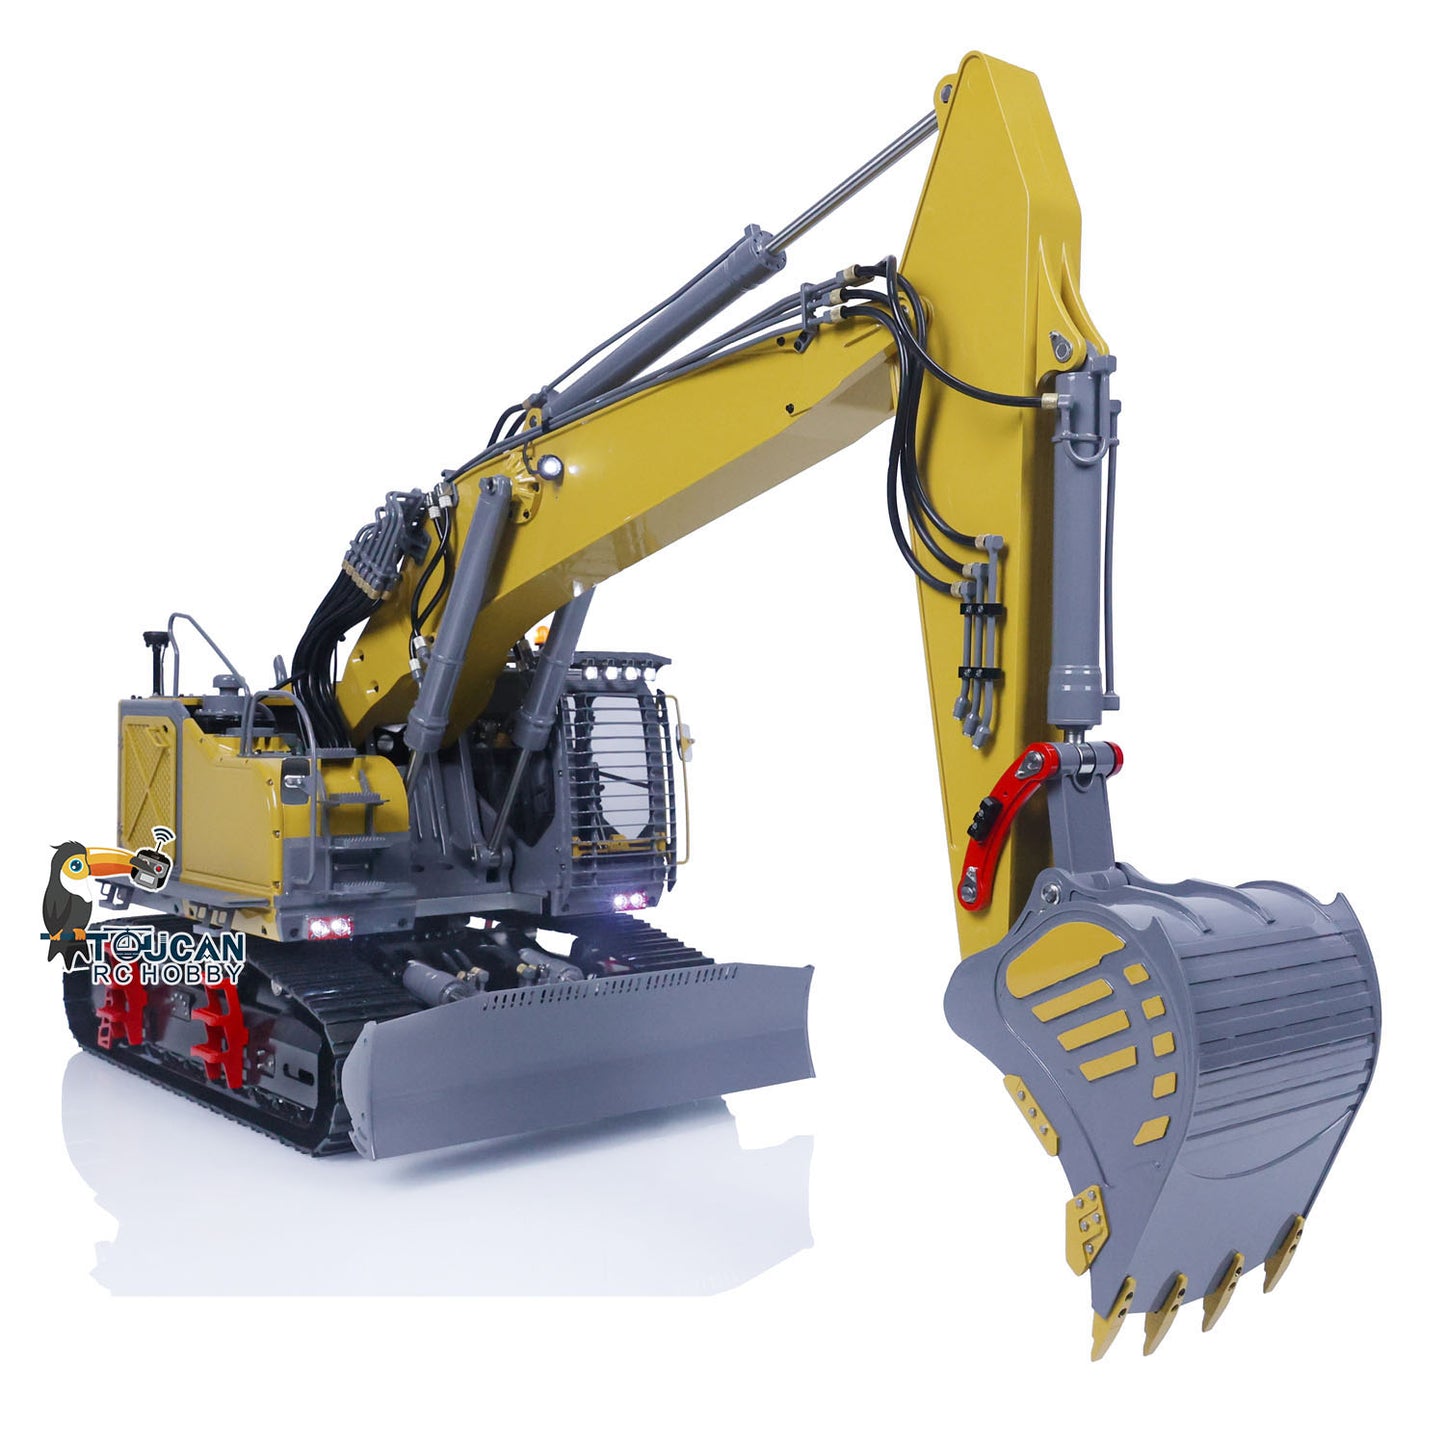 LAST ONE IN STOCK 1/14 LESU Hydraulic RC Painted Excavator Aoue ET35 Remote Controlled Construction Vehicle W/ Black Tracks Motor ESC Light System